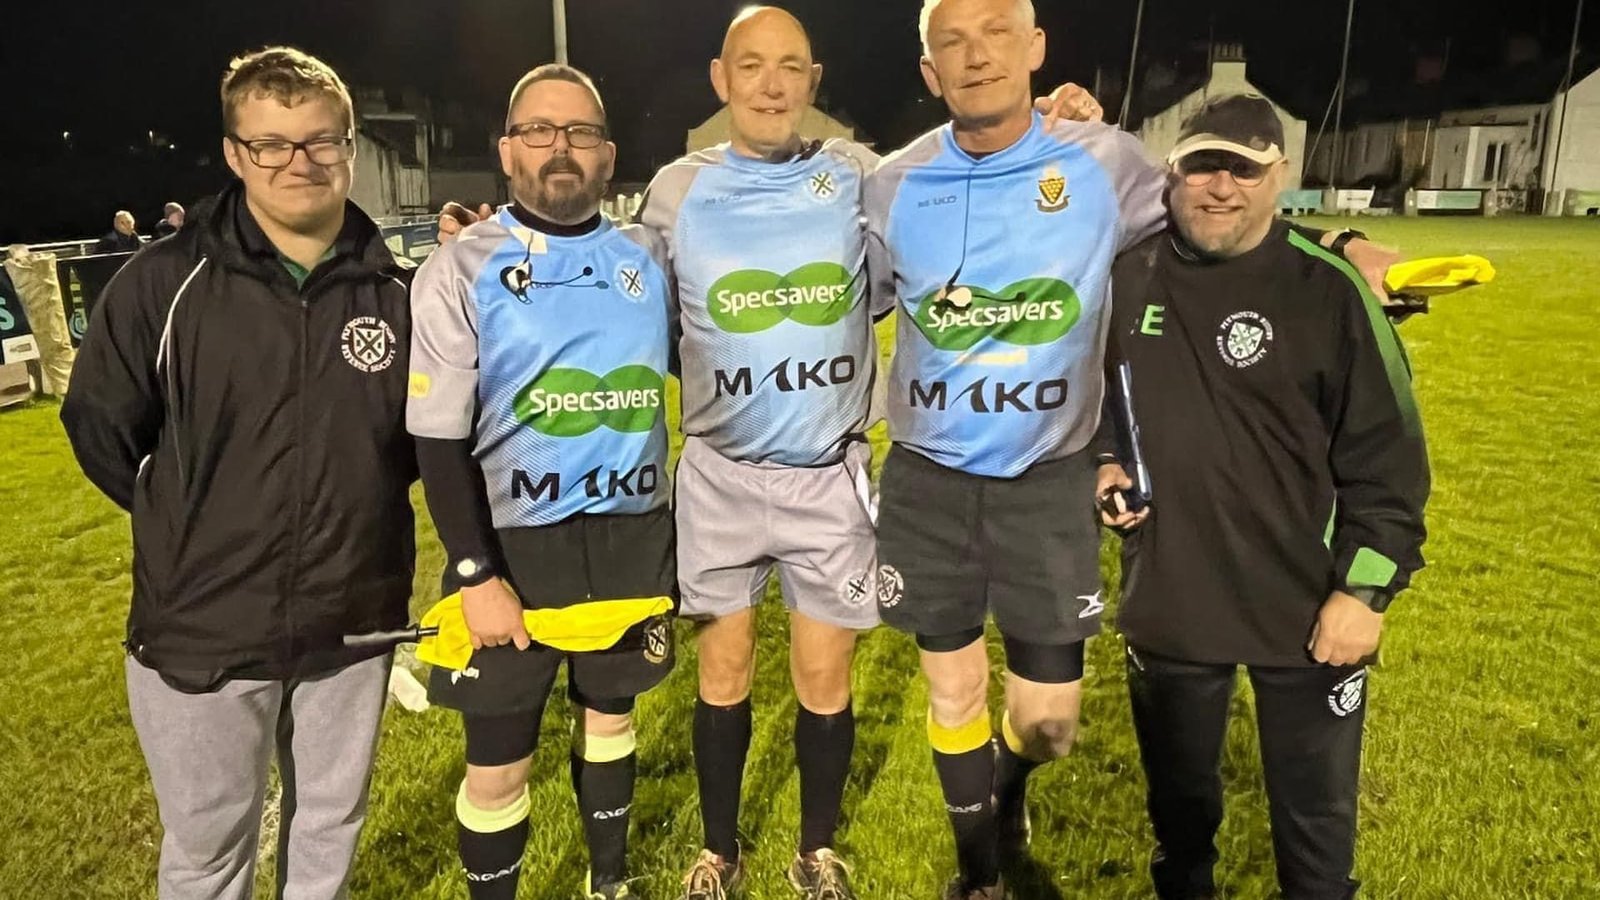 A gathering of several PRRS referees' for a cup match